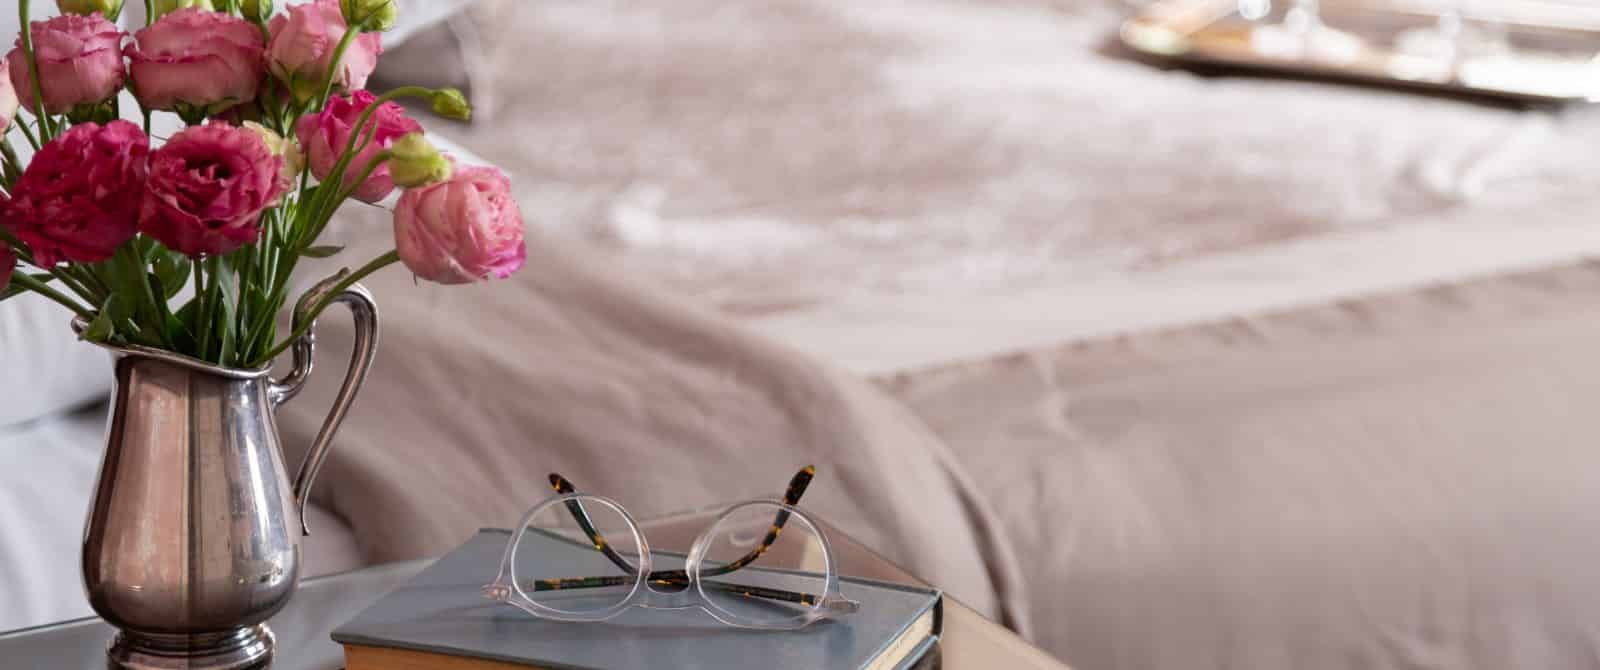 Close up view of wooden nightstand with book, vase with pink roses, and reading glasses